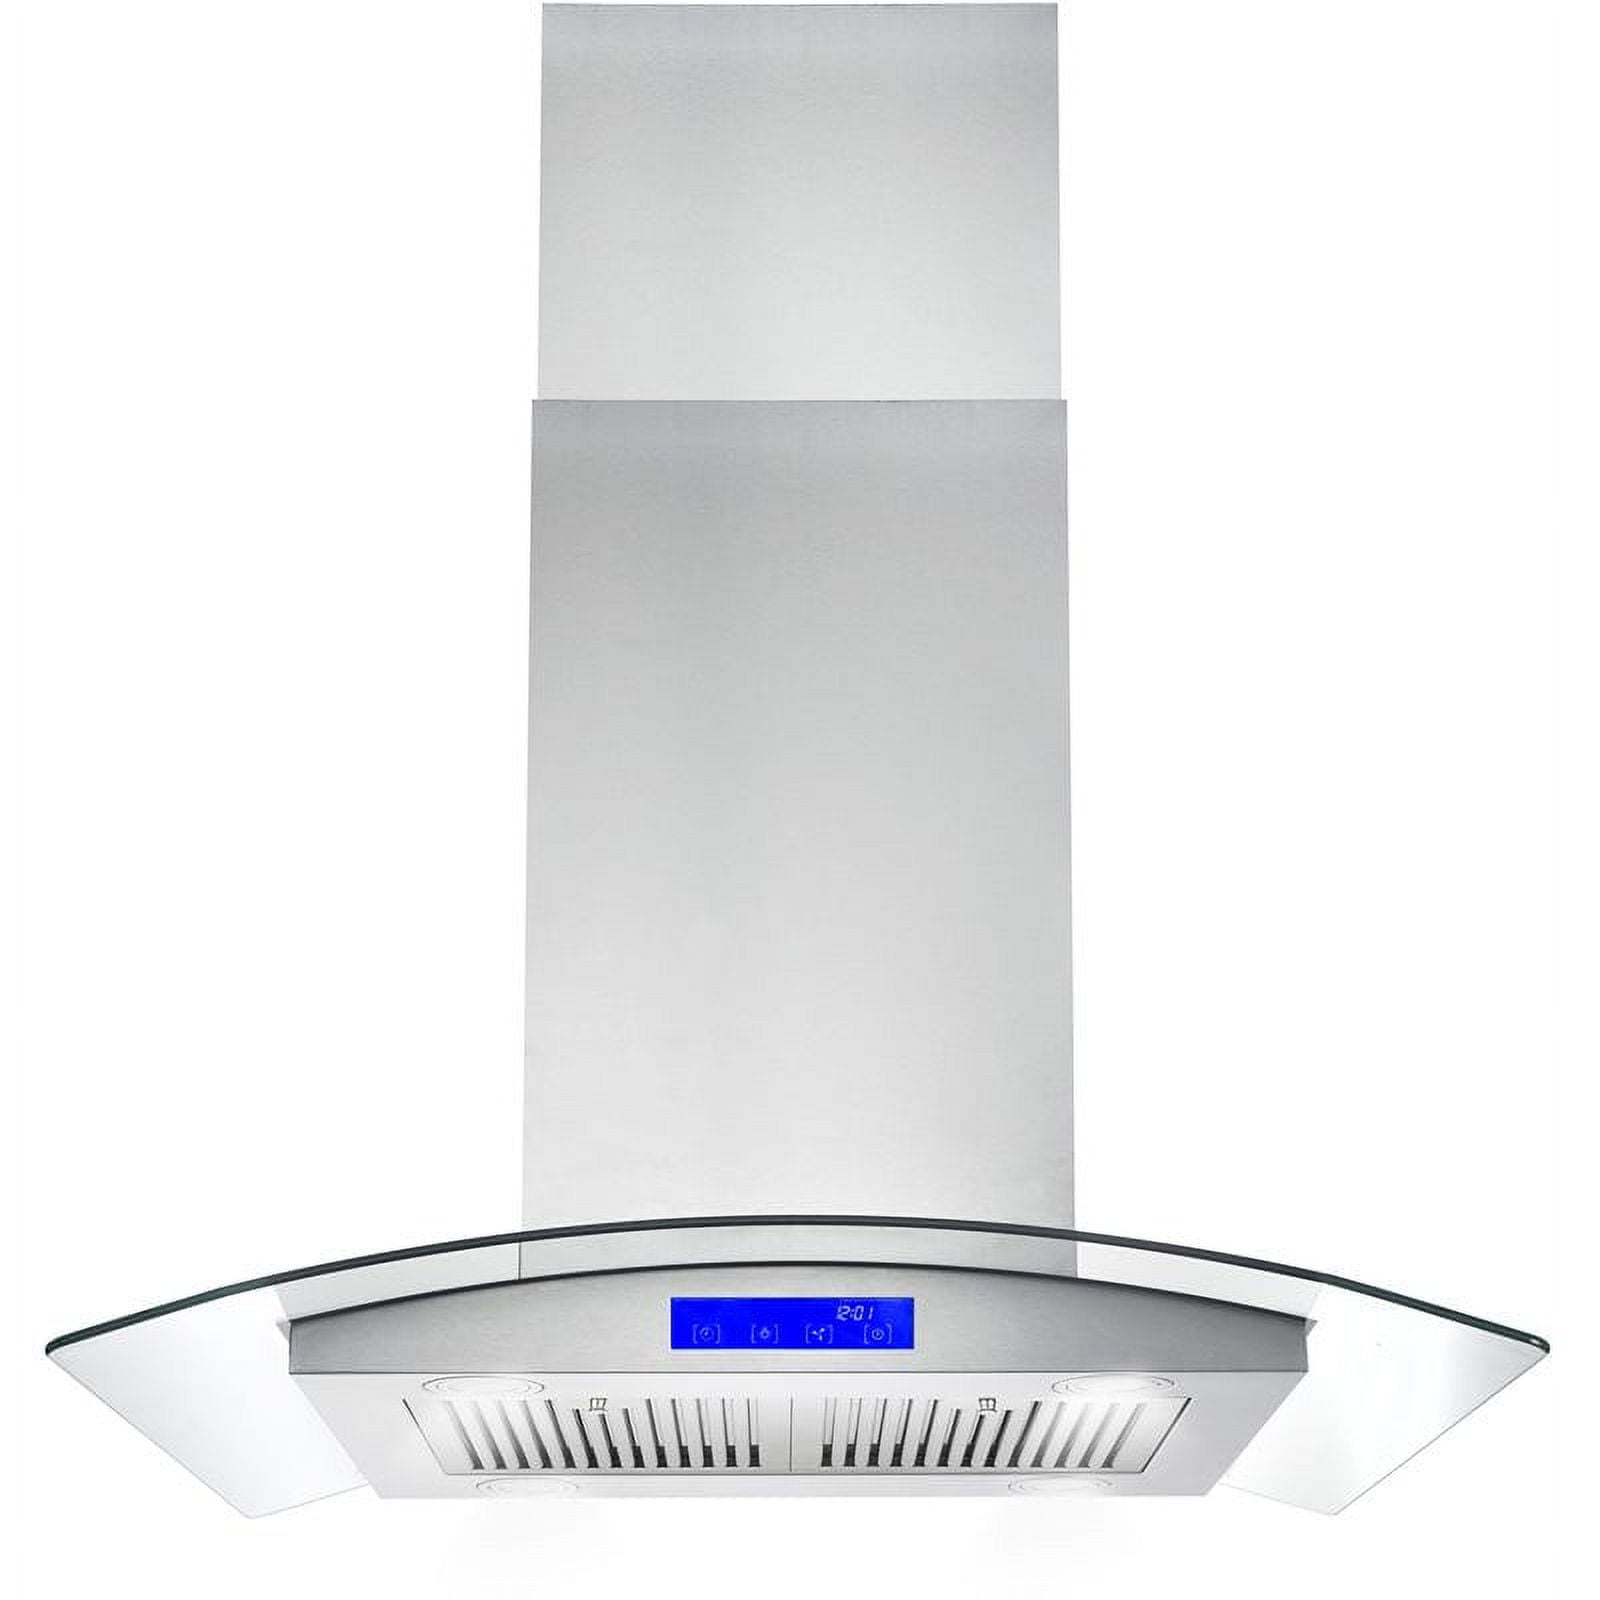 IKTCH Island Range Hood Upgrated 30, 900 CFM Ducted Range Hood with 4  Speed Fan, Stainless Steel Range Hood 30 inch with Gesture Sensing & Touch